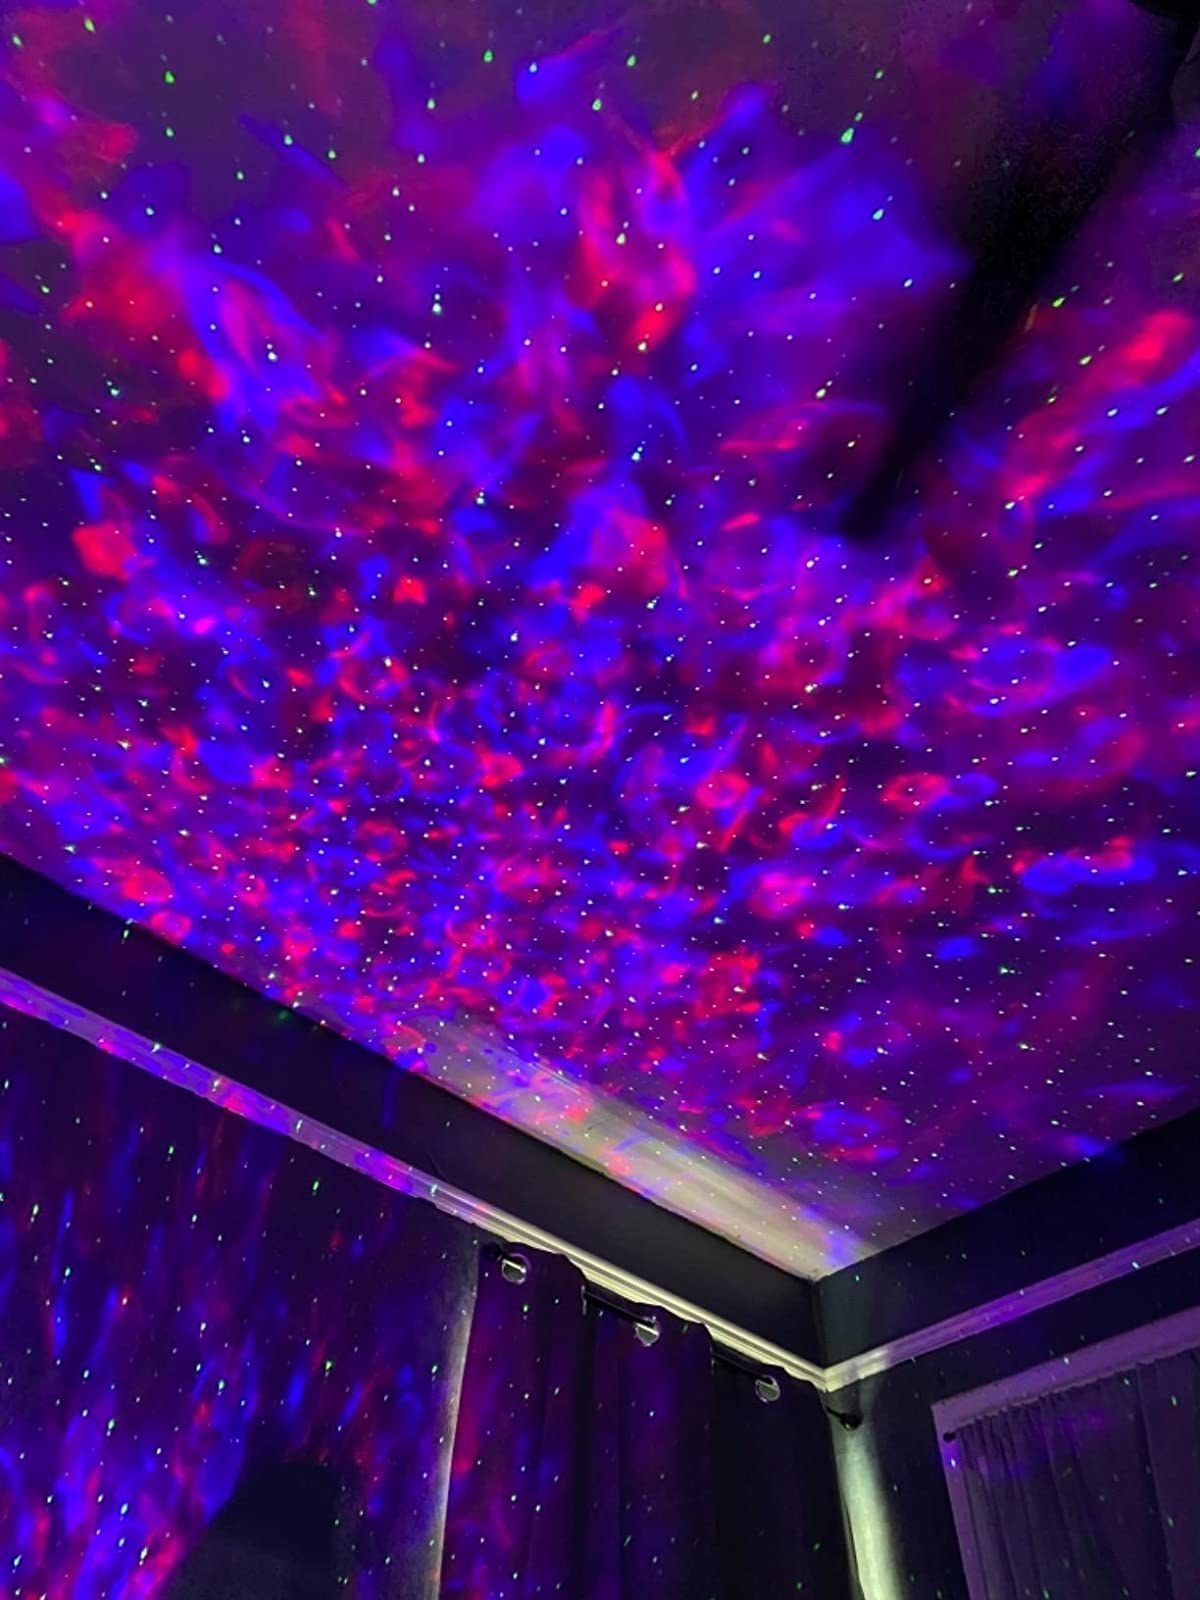 reviewer image of the galaxy projector filling a bedroom with blue and purple light